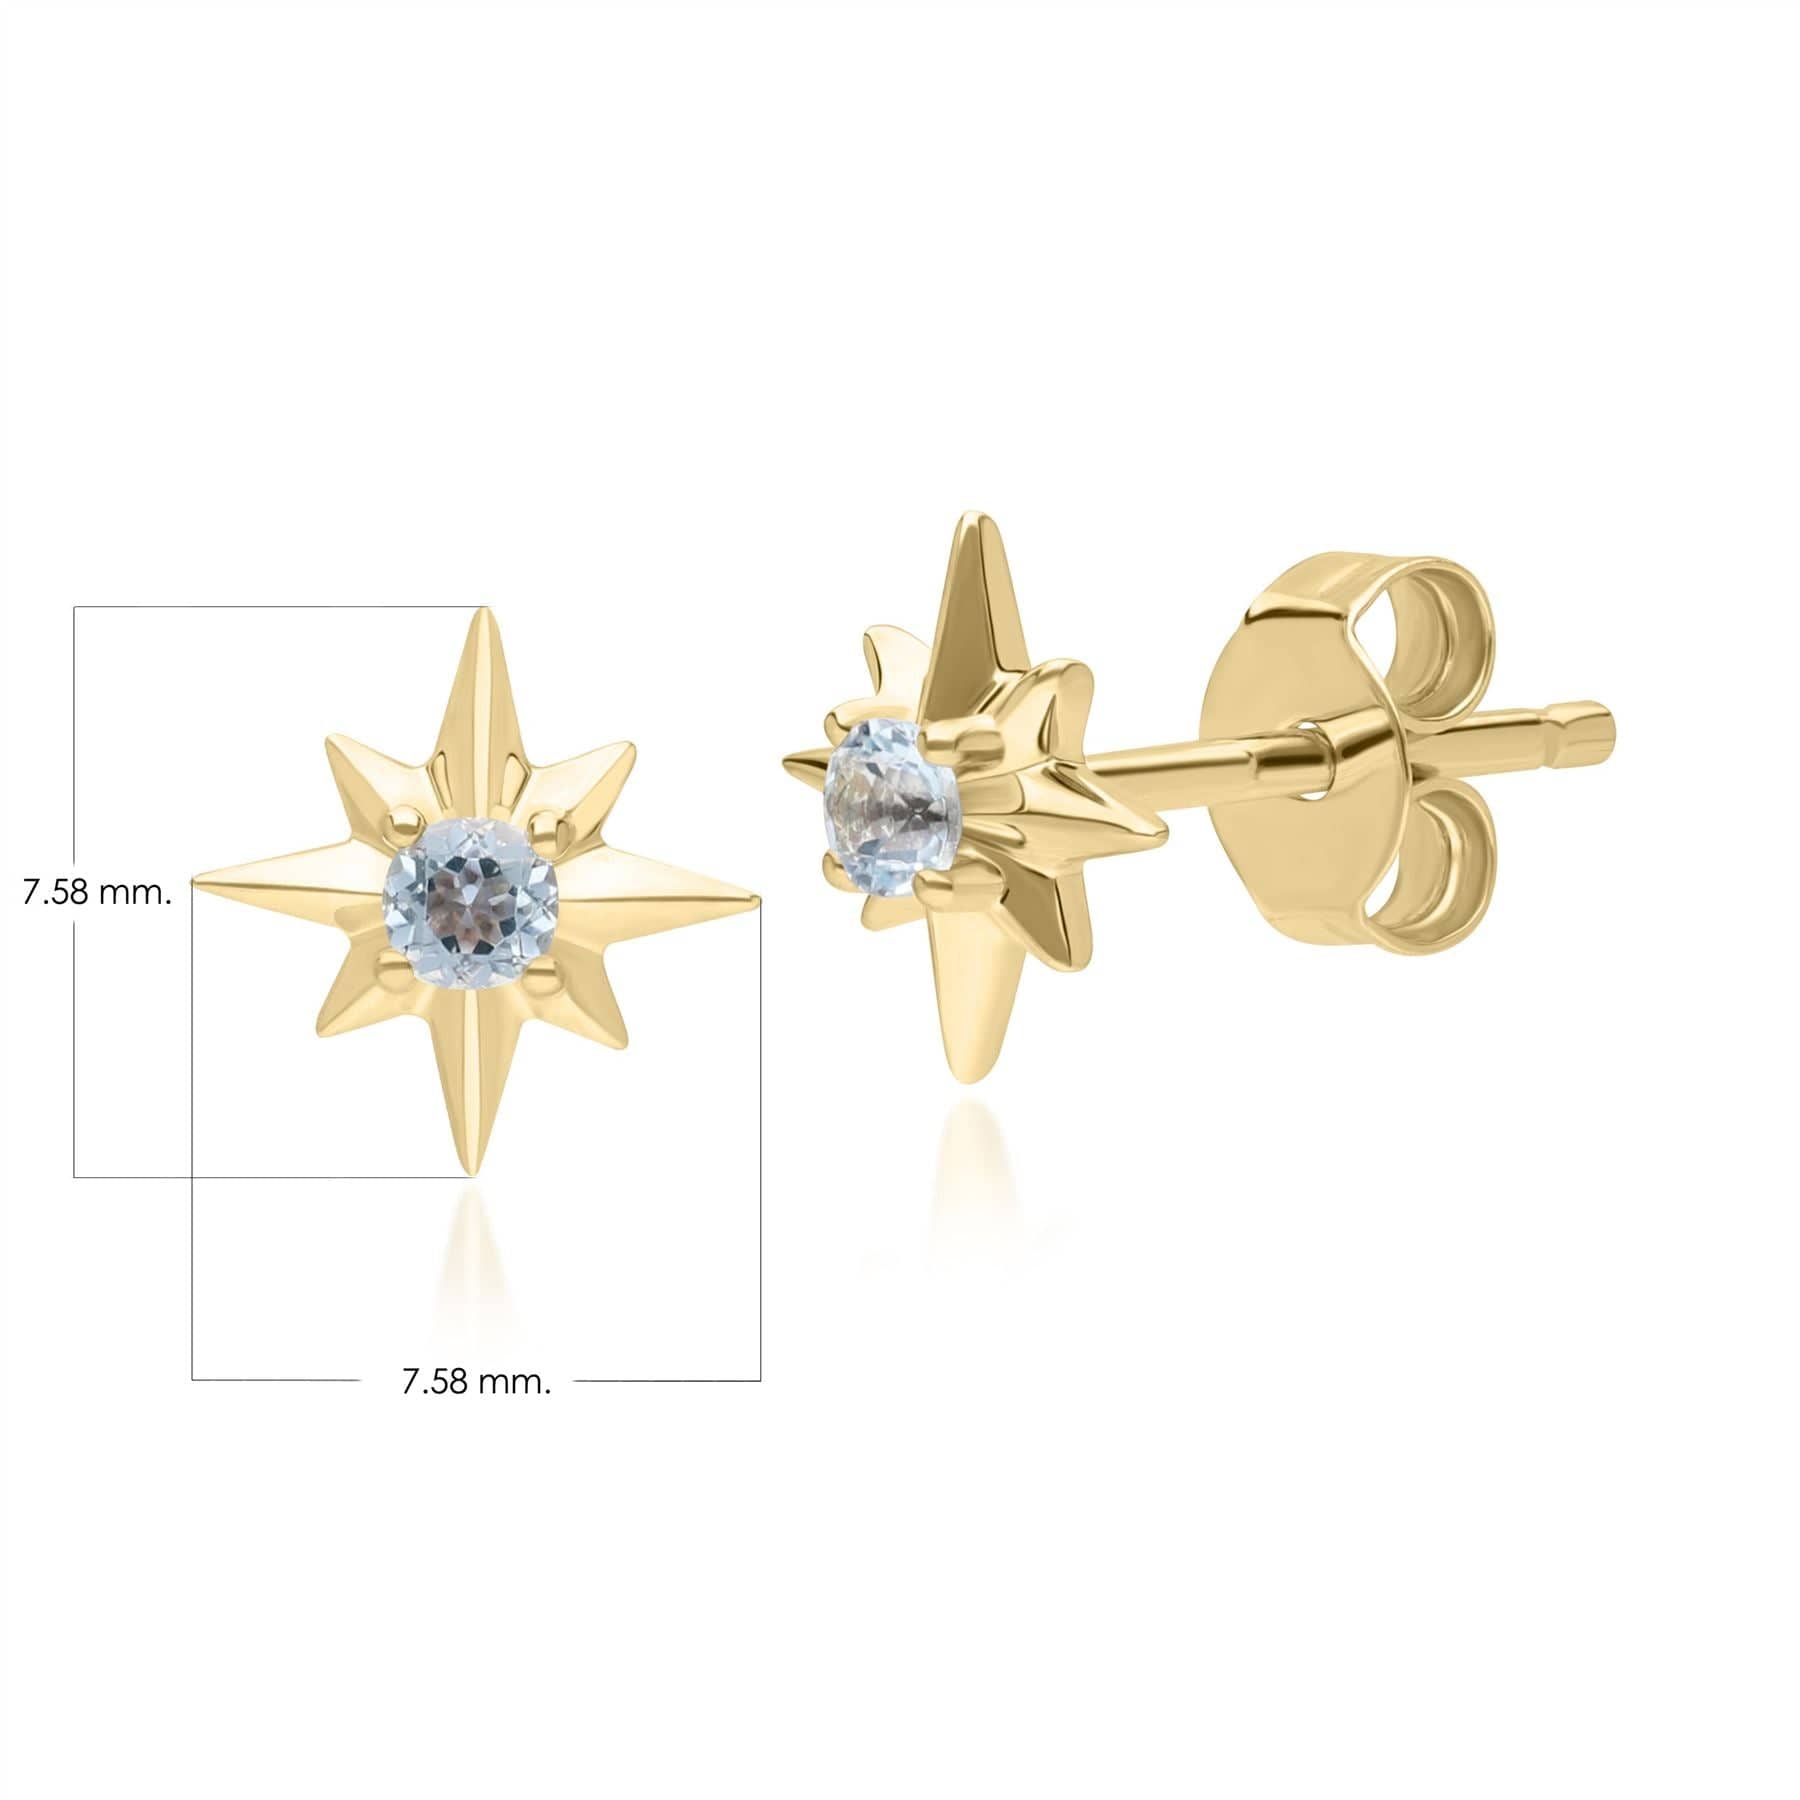 135E1821039 Night Sky Topaz Star Stud Earrings in 9ct Yellow Gold Dimensions